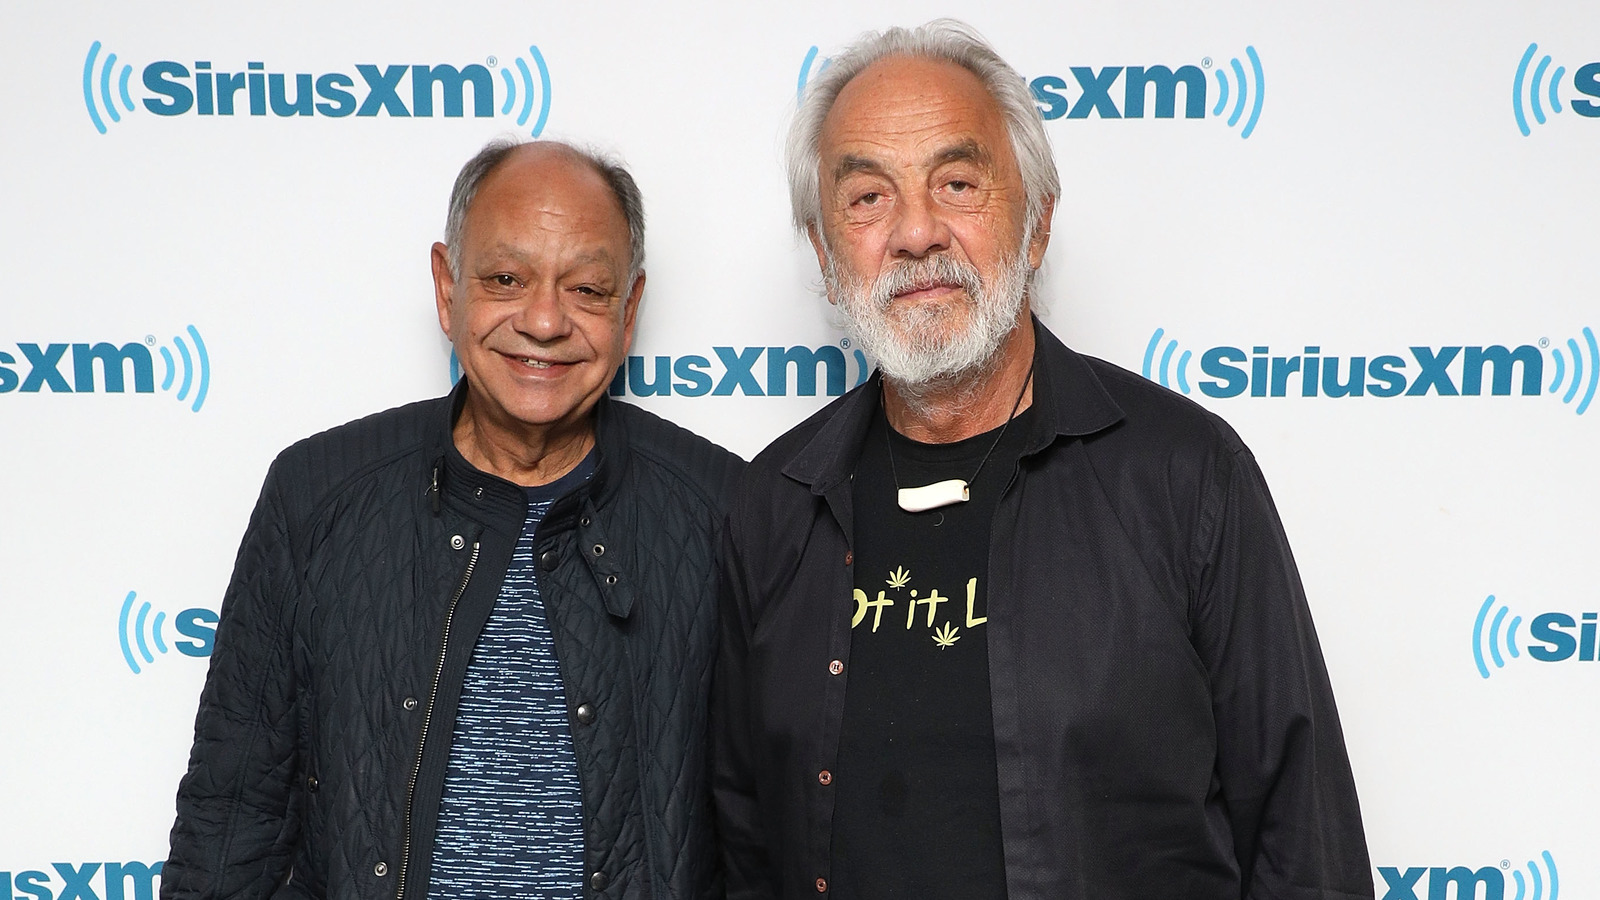 Cheech And Chong's Net Worth Is Higher Than You Might Think